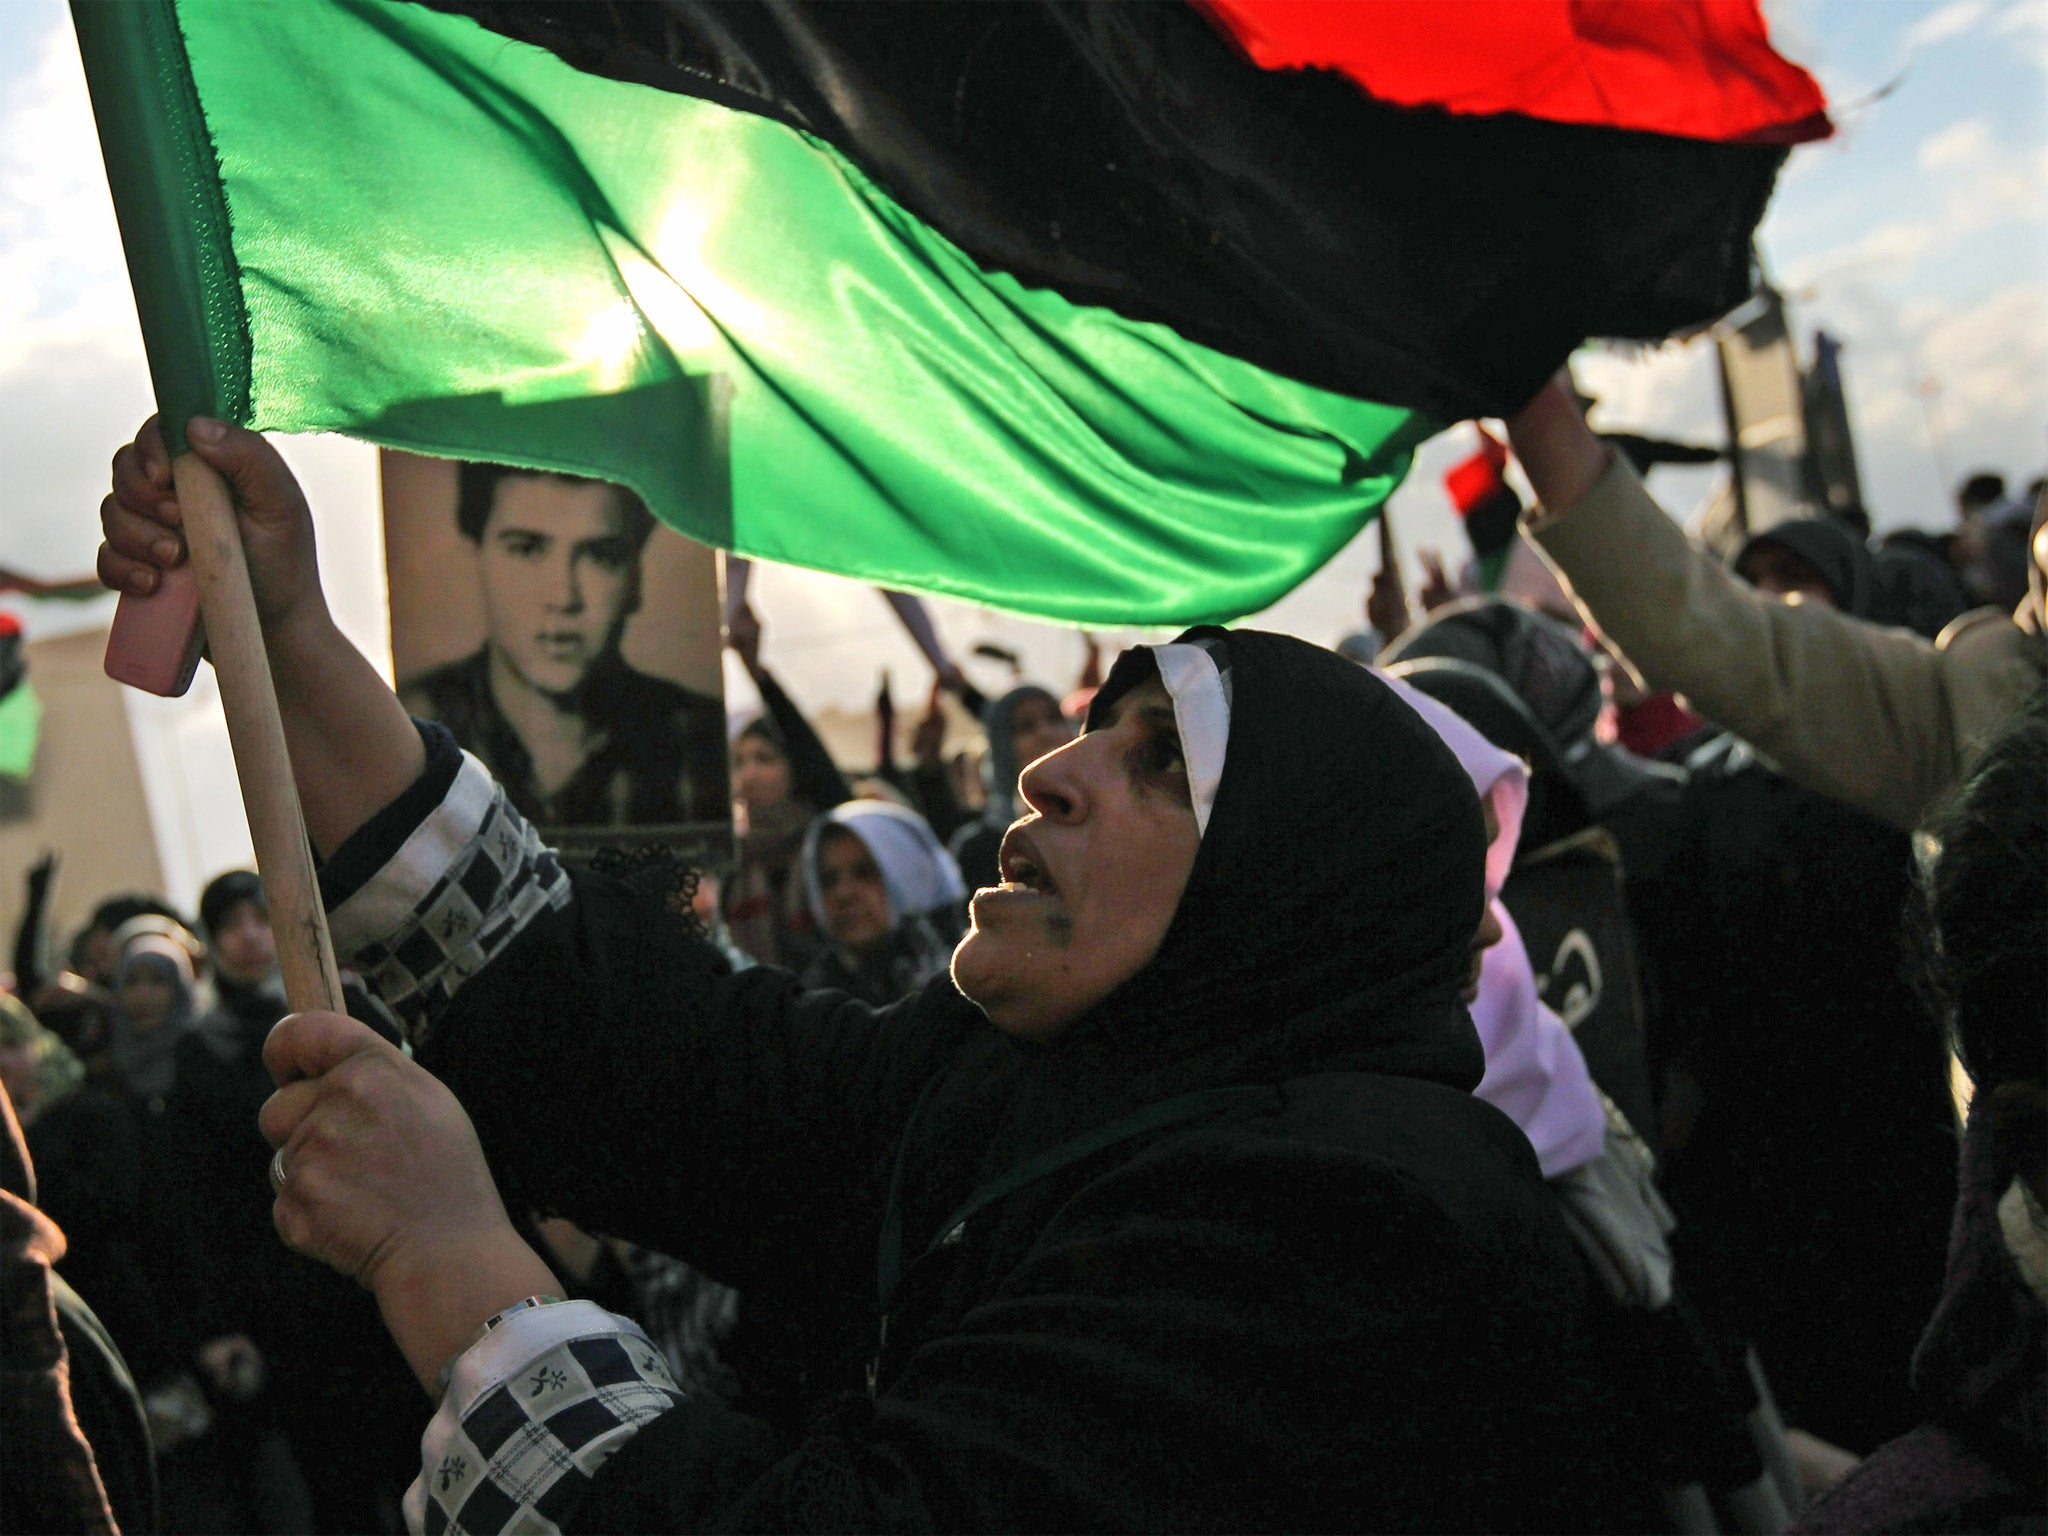 Mothers claiming their sons were killed by the Gaddafi regime call for the dictator’s removal in February 2011 (Getty)